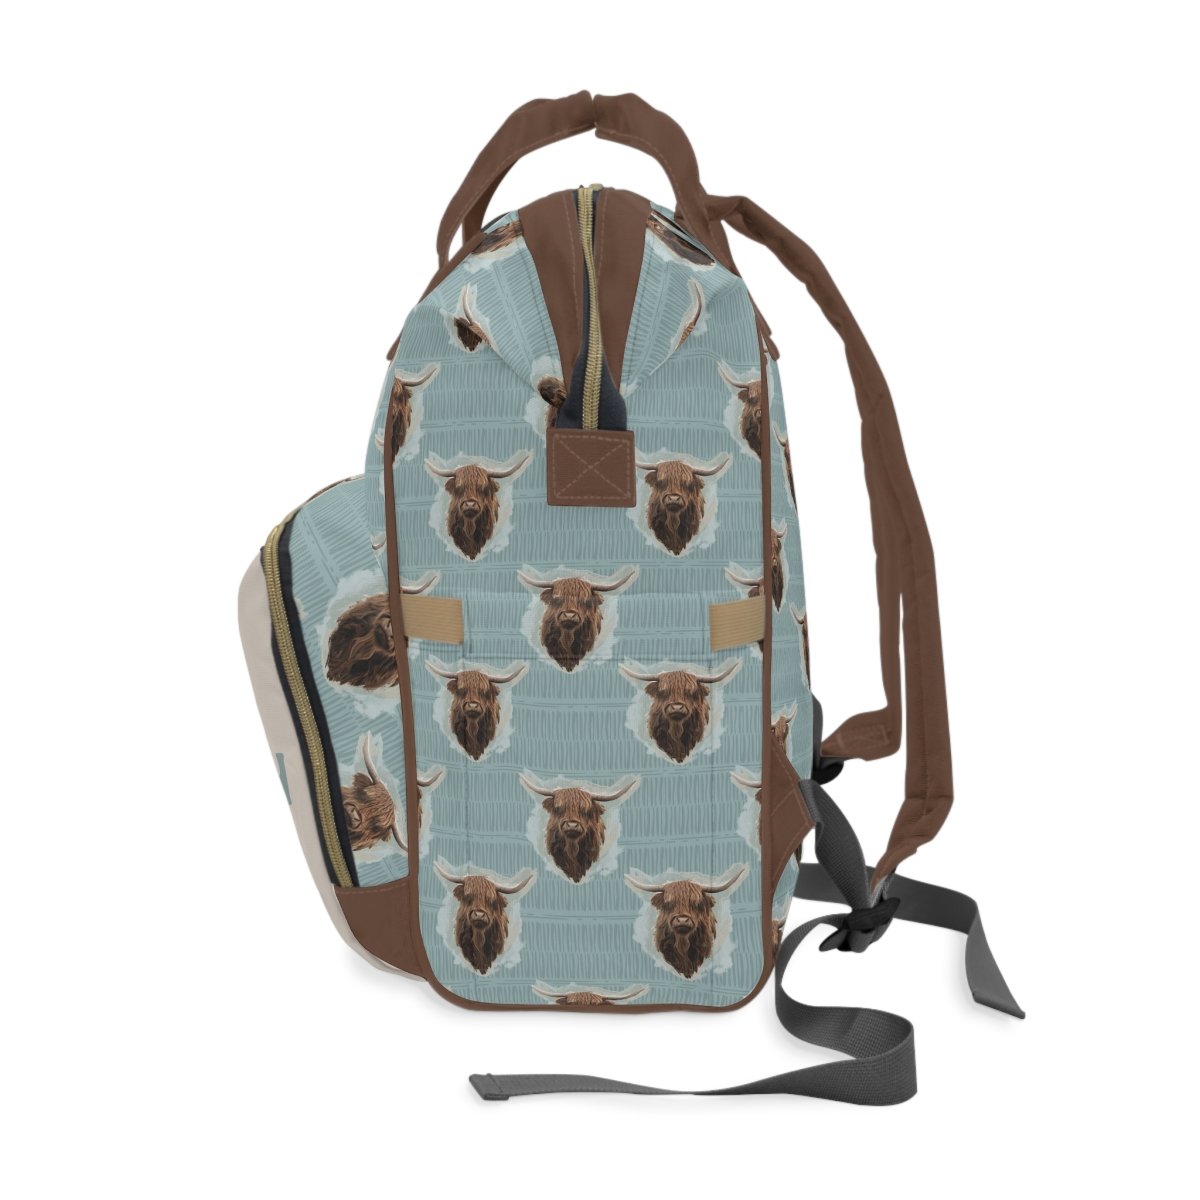 Highland Cow Boy Personalized Backpack Diaper Bag - gender_boy, Highland Cow Boy, text